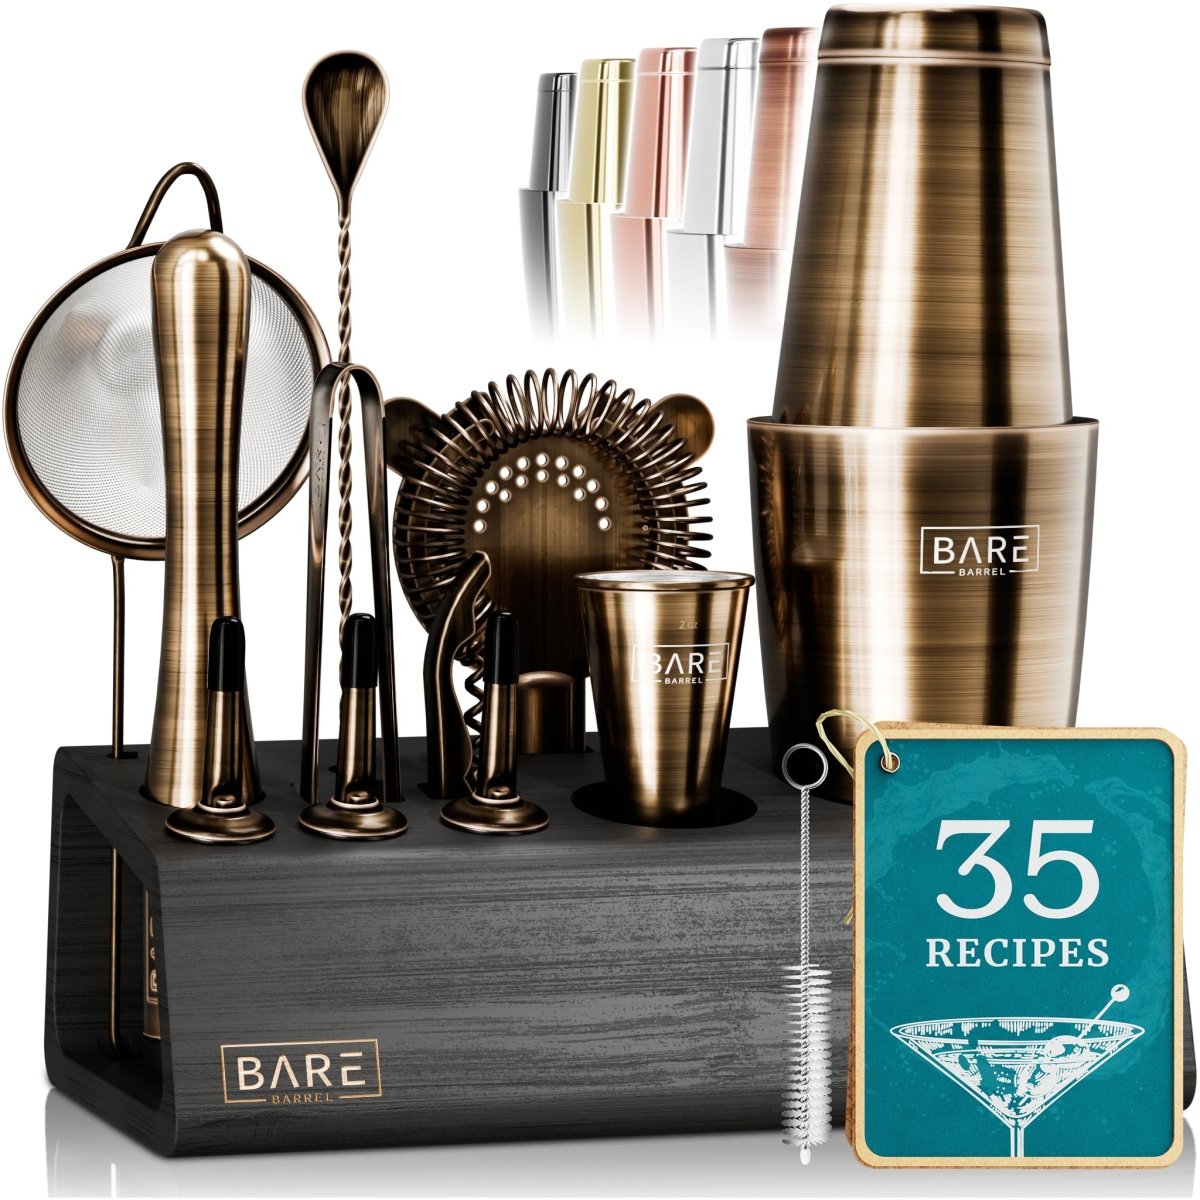 BARE BARREL® 14-Piece Professional Cocktail Making Set - 7 colors | Includes 28oz Boston Shaker & Home Bar Mixing Tools with 35 Recipe Cards | Ideal Bartending Kit Gift Set - Easiley - B0CH849831